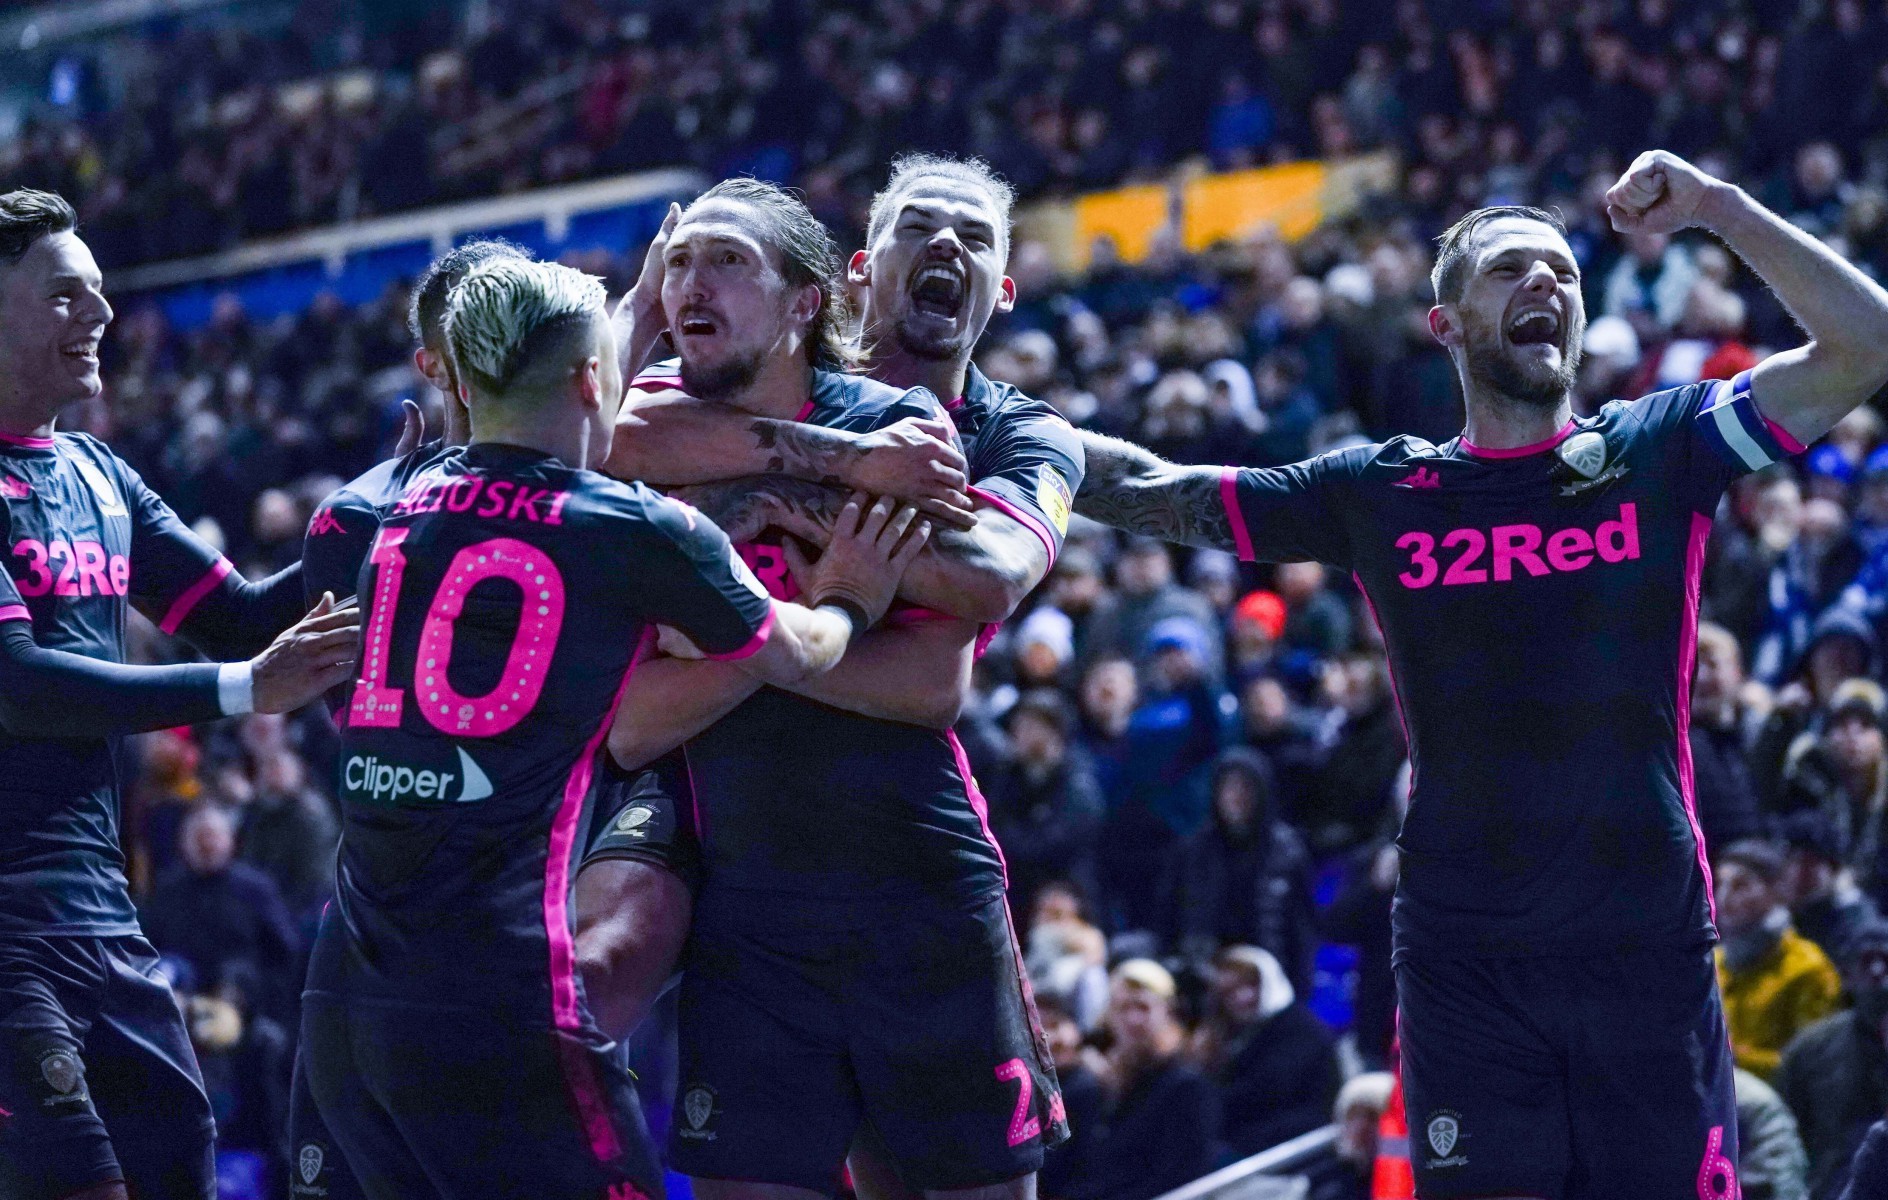 Leeds celebrate their thrilling late win at Birmingham which saw them climb to the top of the Championship